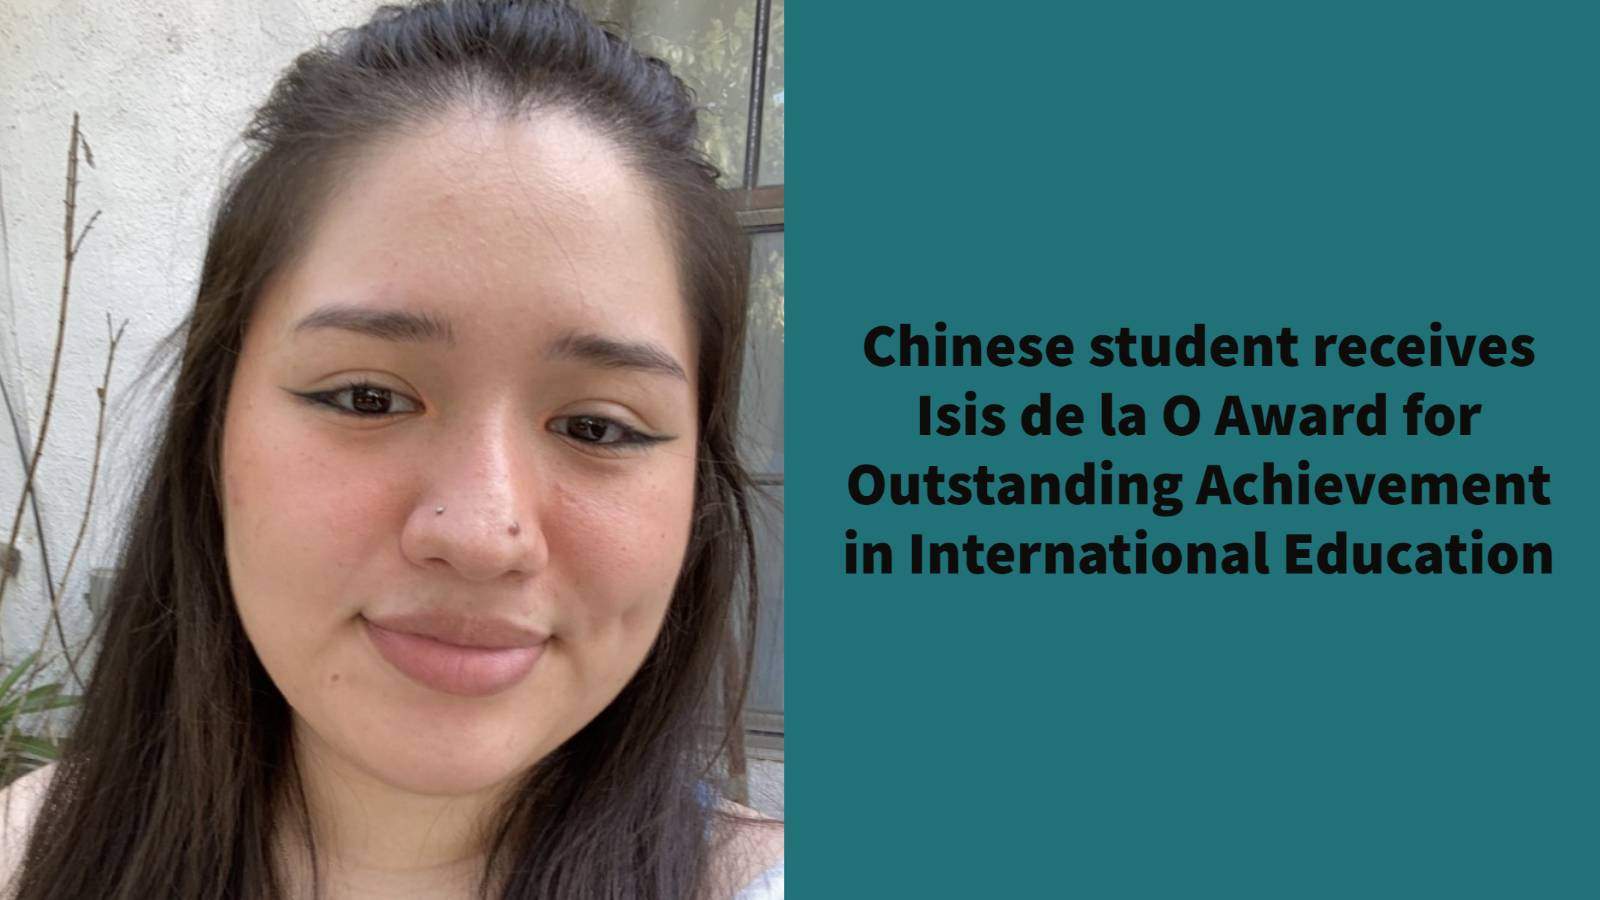 close-up of woman's face, text: Chinese student receives Isis de la O Award for Outstanding Achievement in International Education